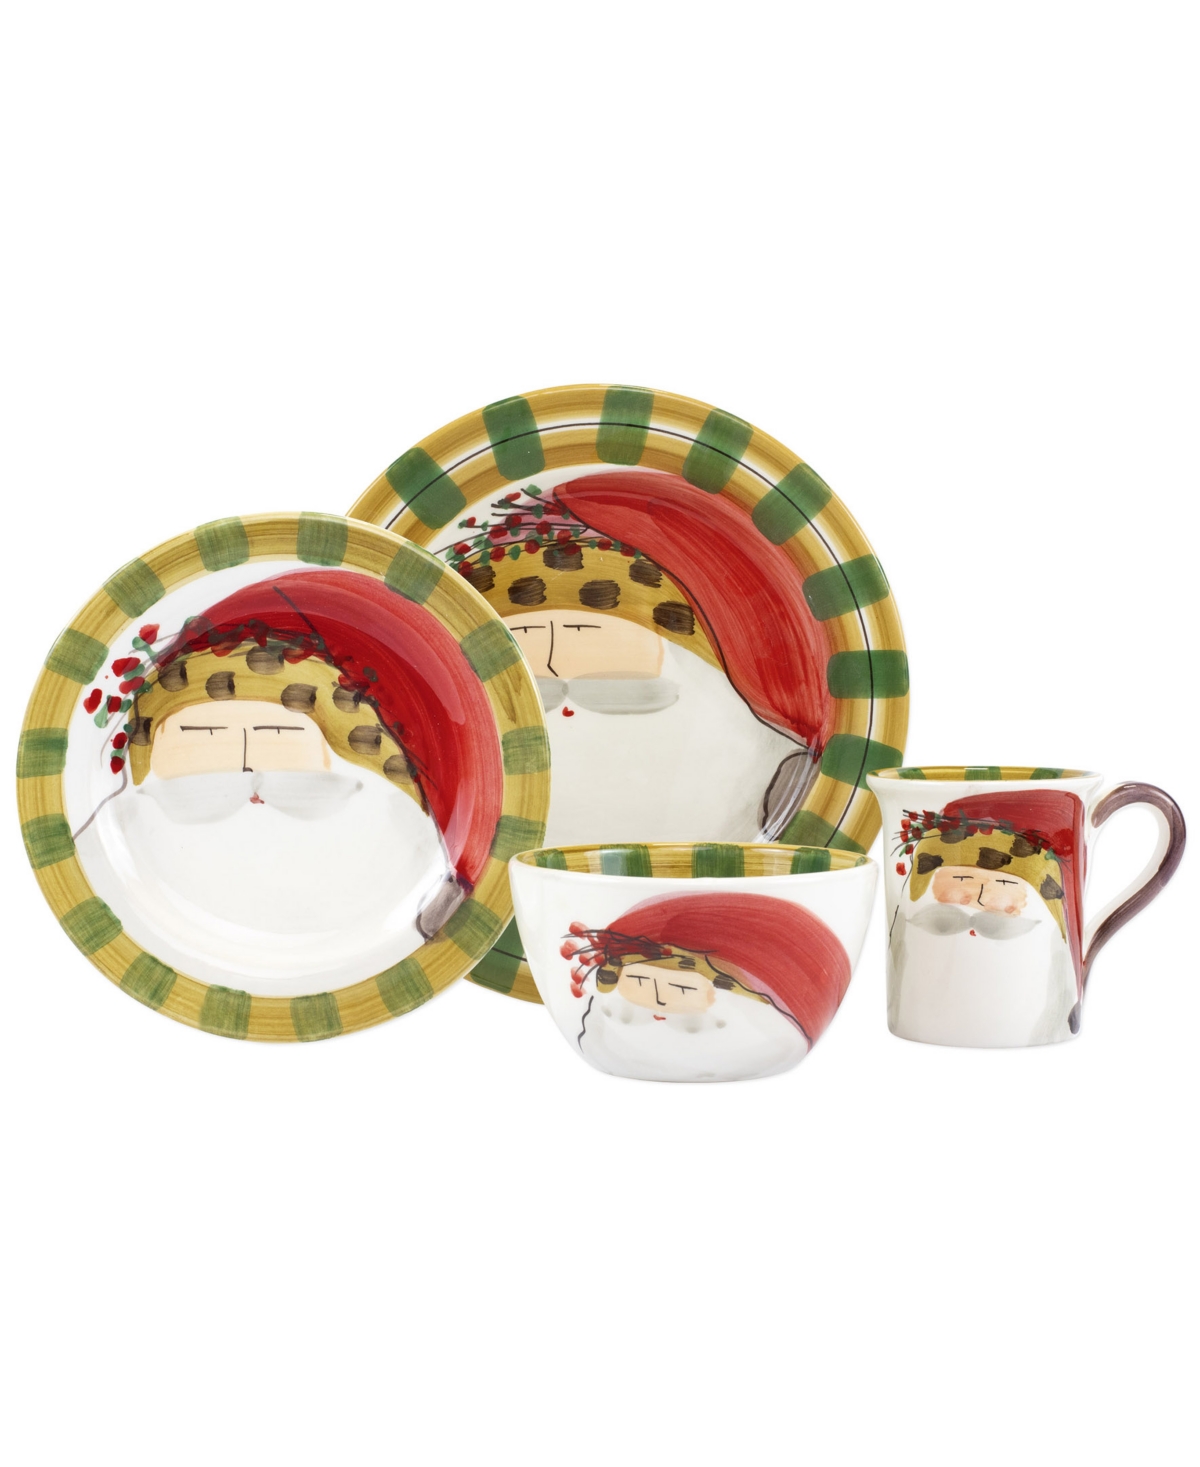 Old St. Nick Animal Hat 4 Piece Place Setting - Animal